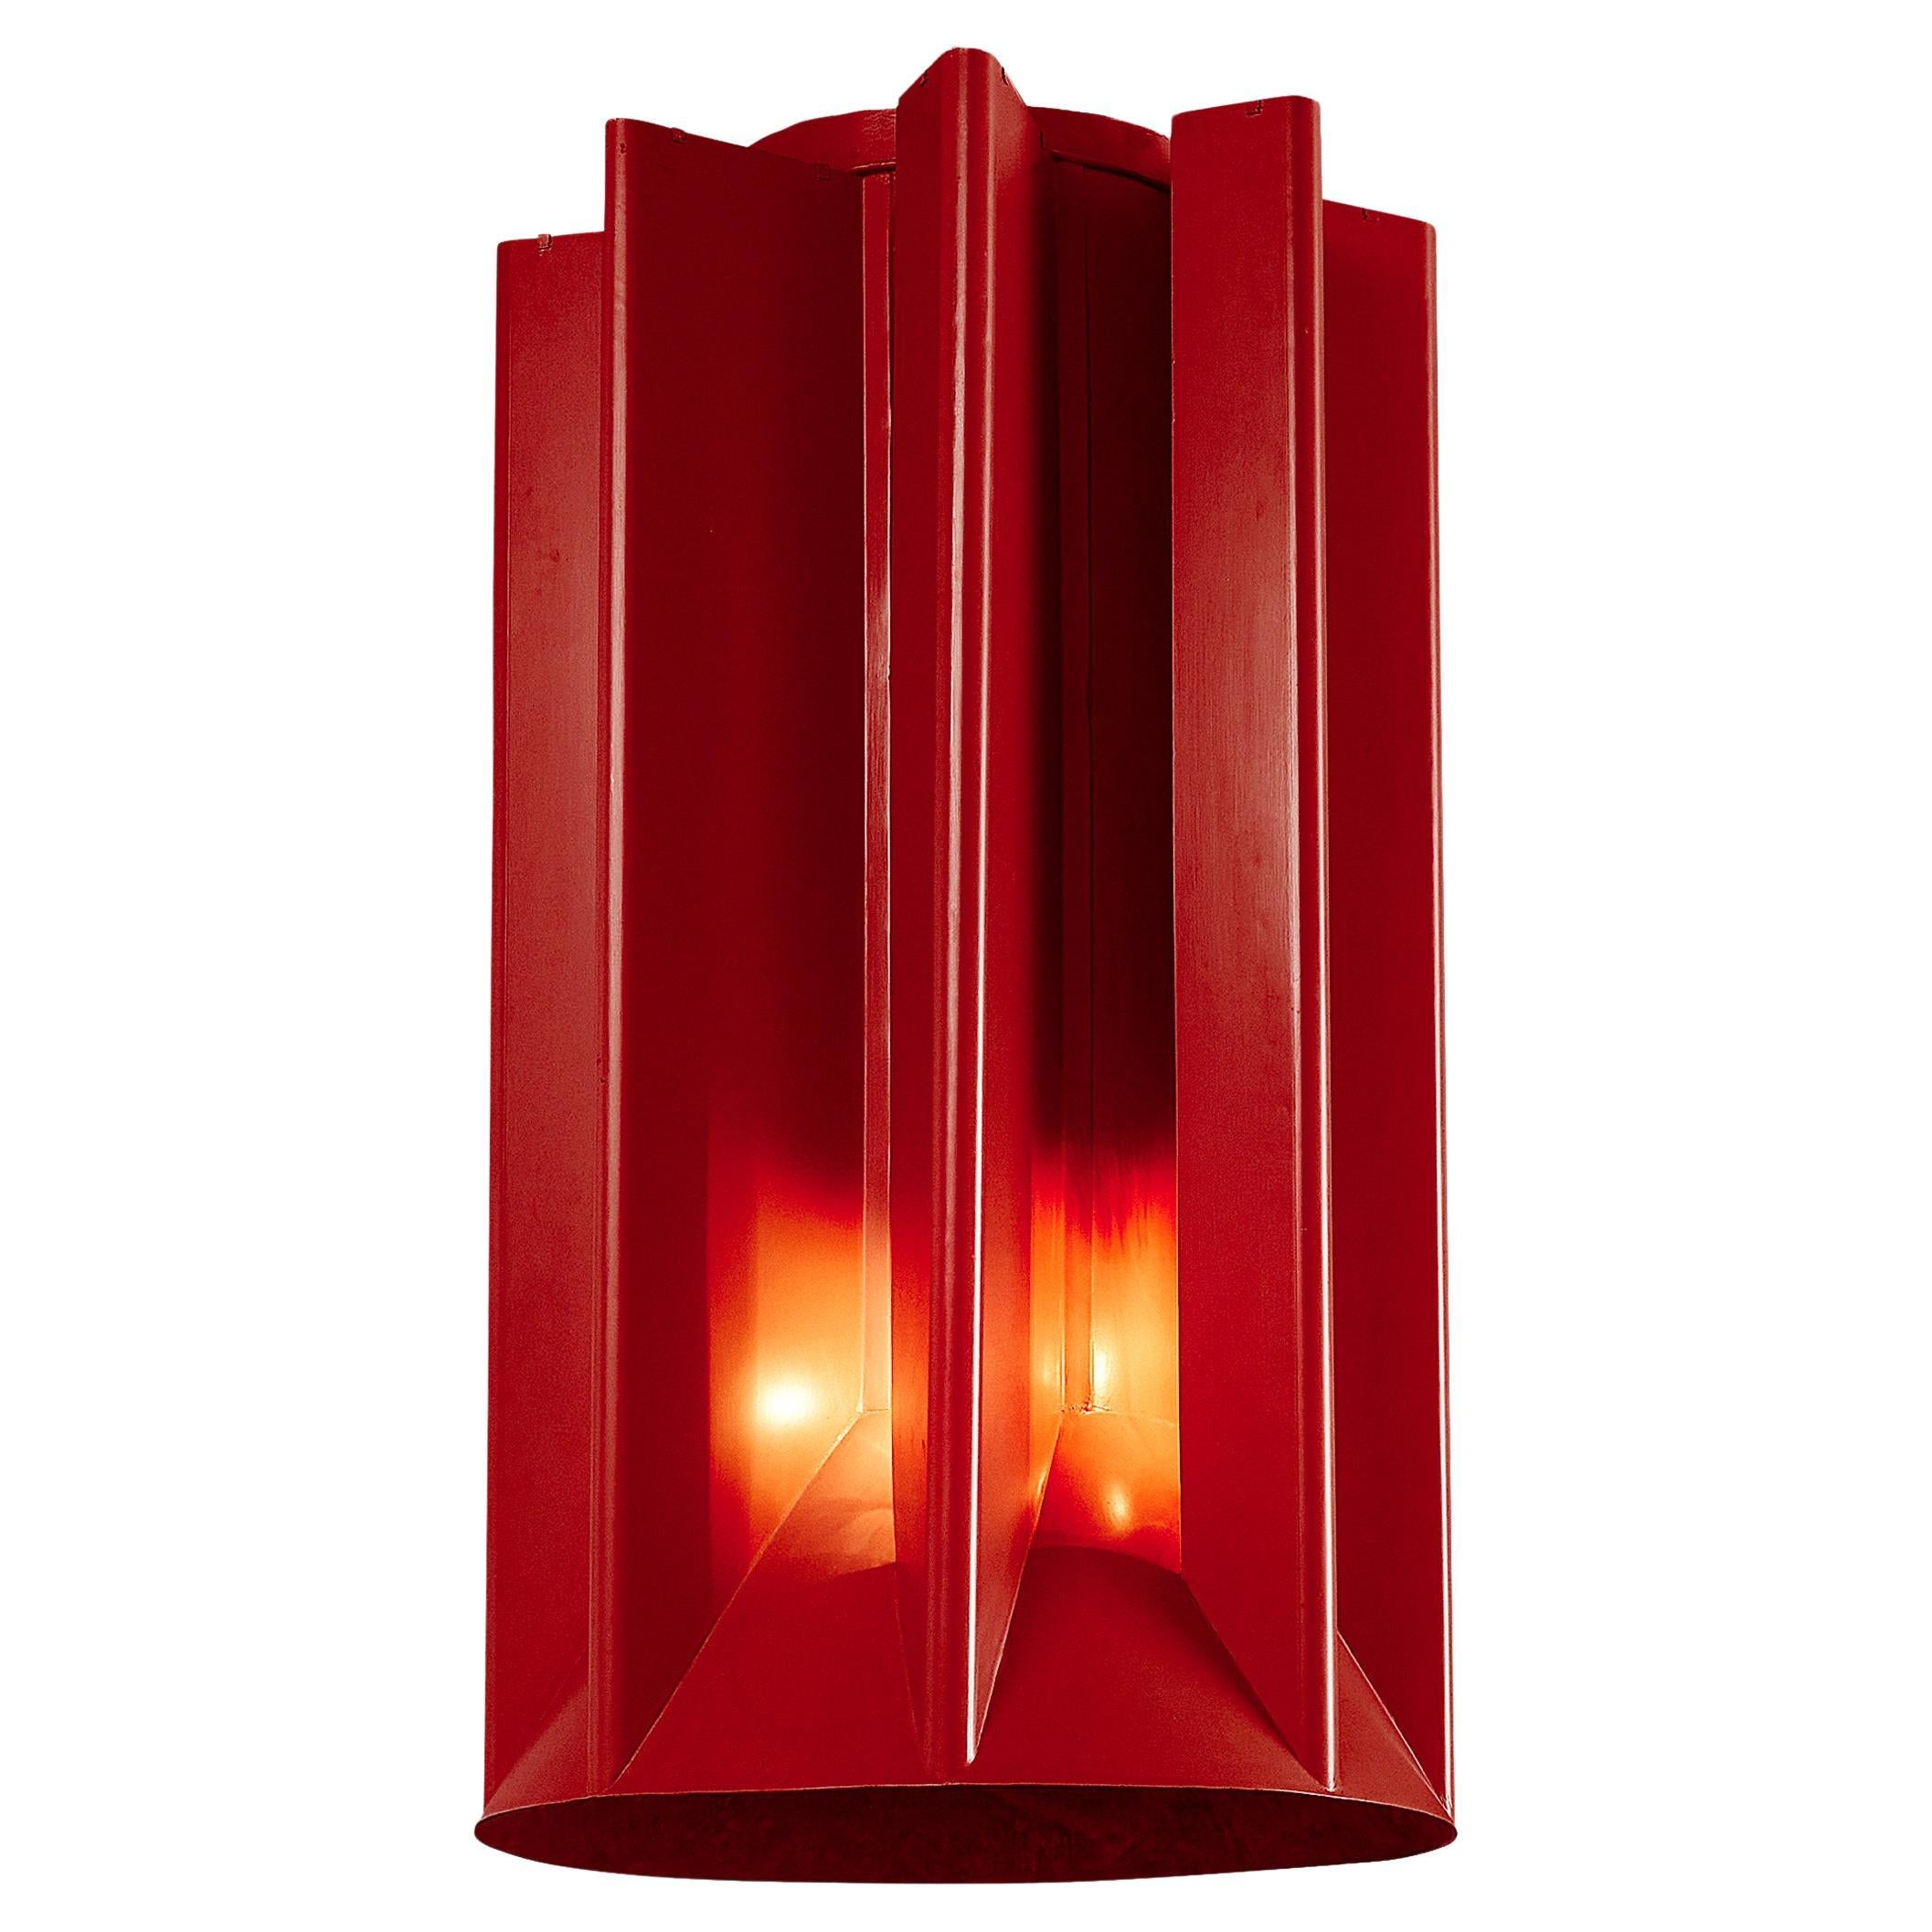 Sculptural Chimney in Burgundy Red Steel with Integrated Lights 